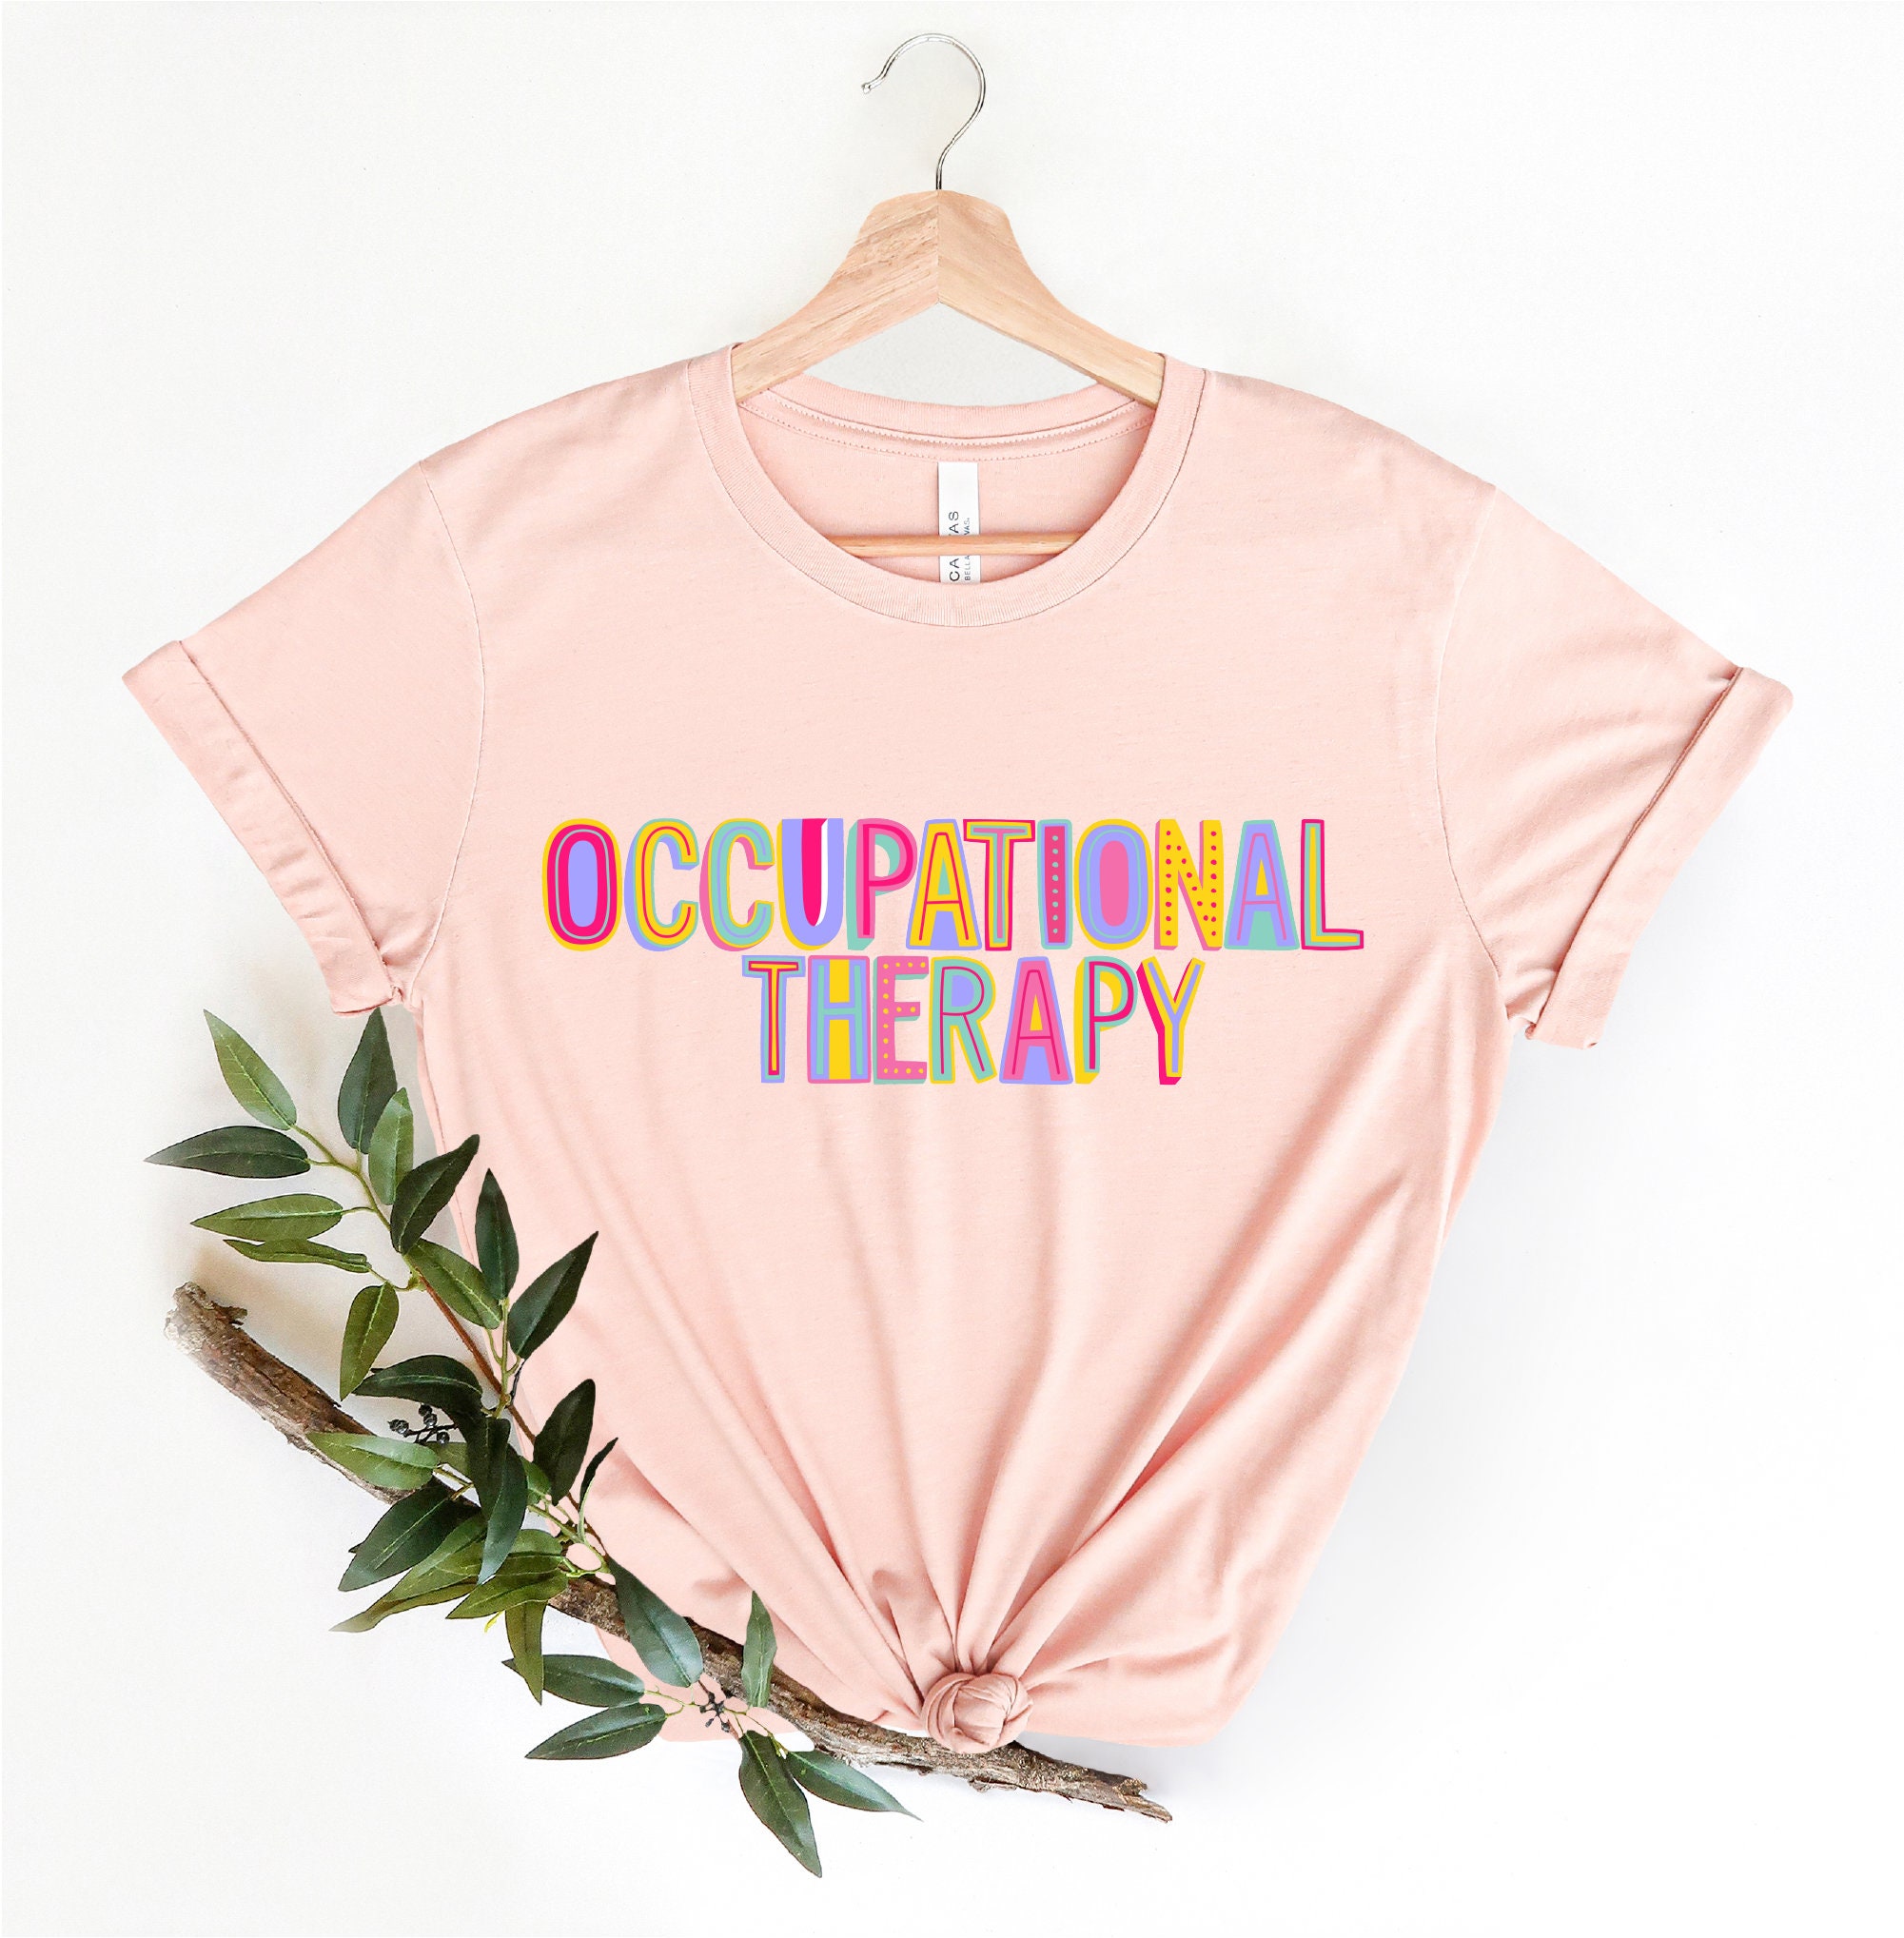 Discover Occupational Therapy Shirt, Occupational Therapist Shirt, OT Shirt, Special Education Shirt, Therapist Shirt, OT Assistant Shirt, OT Tee